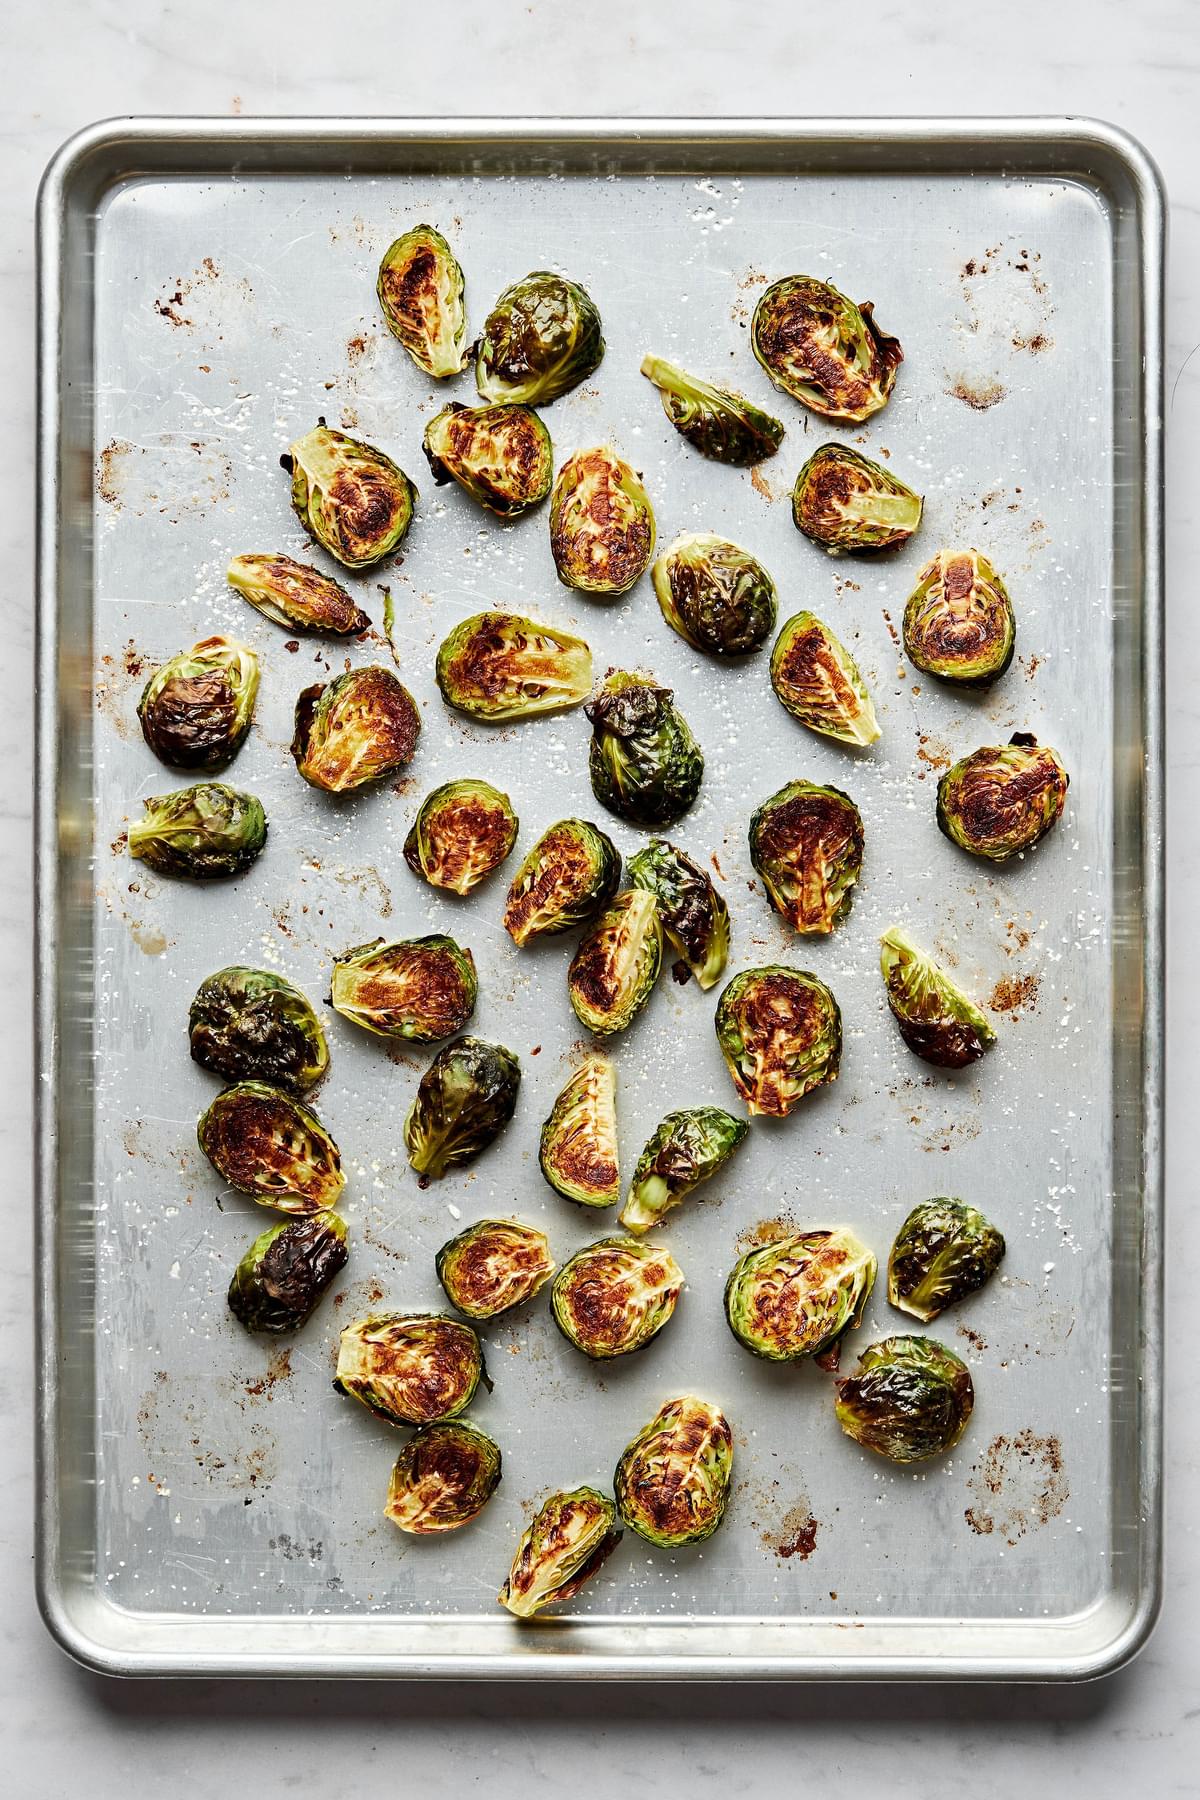 roasted Brussels sprouts on a baking sheet just out of the oven with caramelized, crunchy outsides and soft interiors